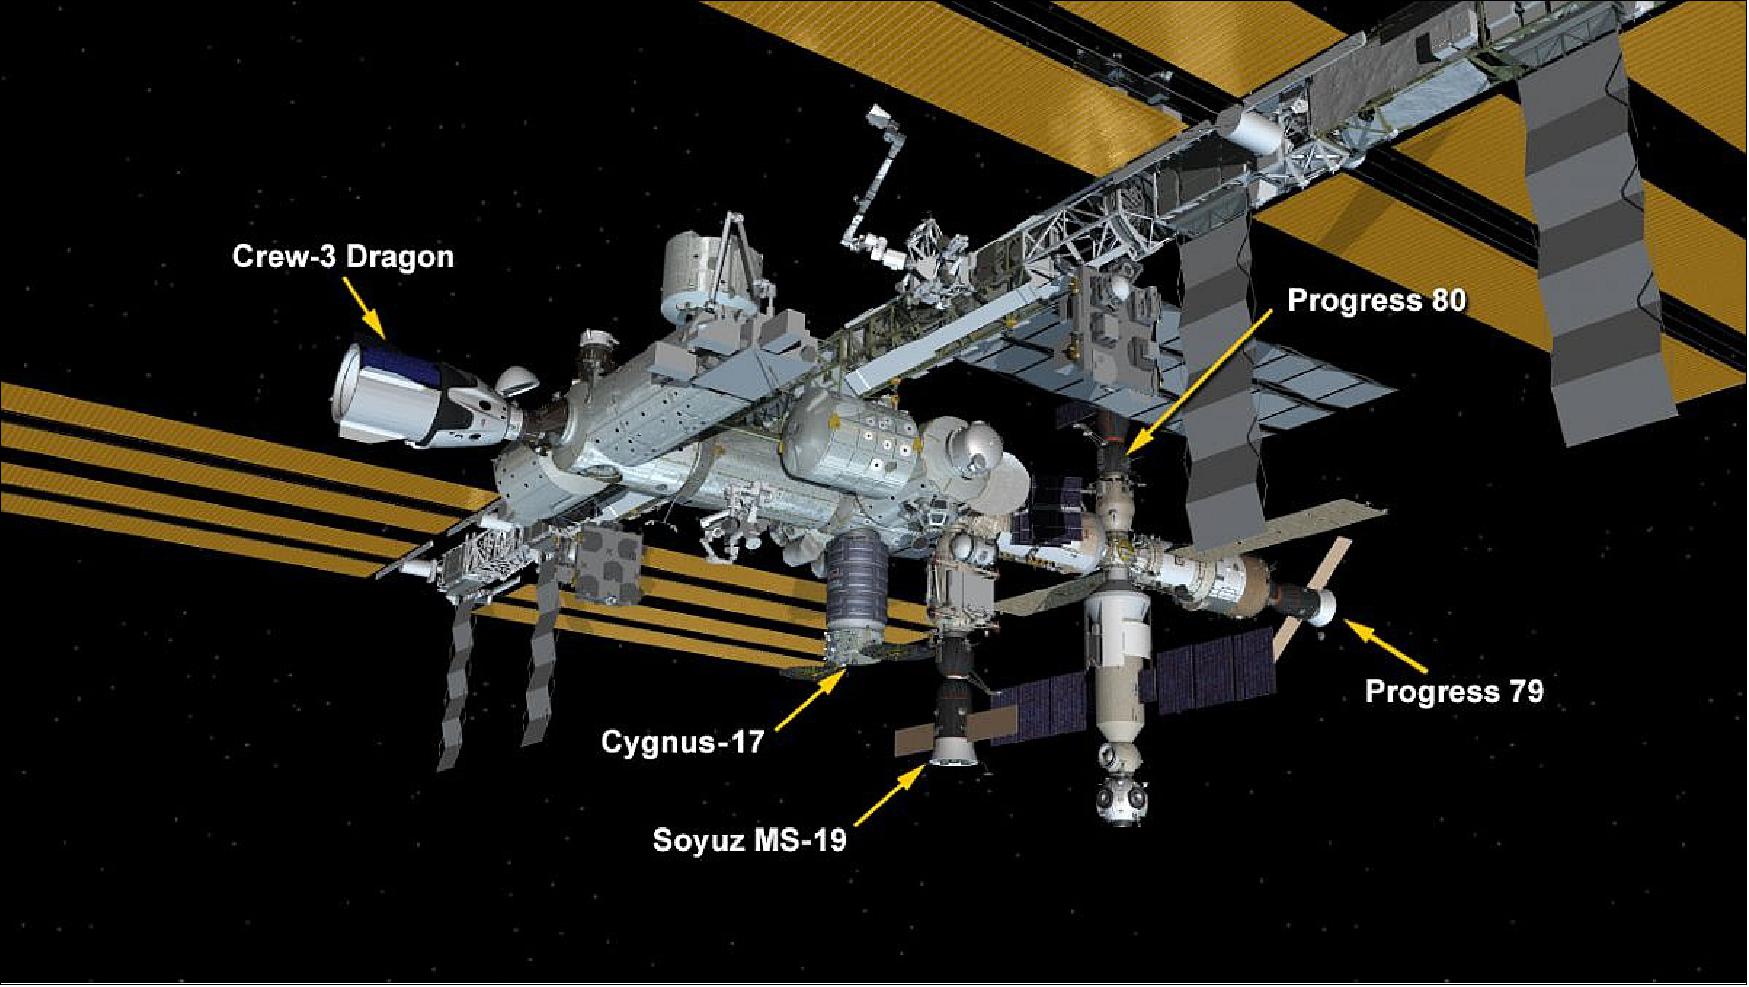 Figure 21: International Space Station Configuration. Five spaceships are parked at the space station including the SpaceX Crew Dragon; Northrop Grumman's Cygnus space freighter; and Russia's Soyuz MS-19 crew ship and the Progress 79 and 80 resupply ships (image credit: NASA)